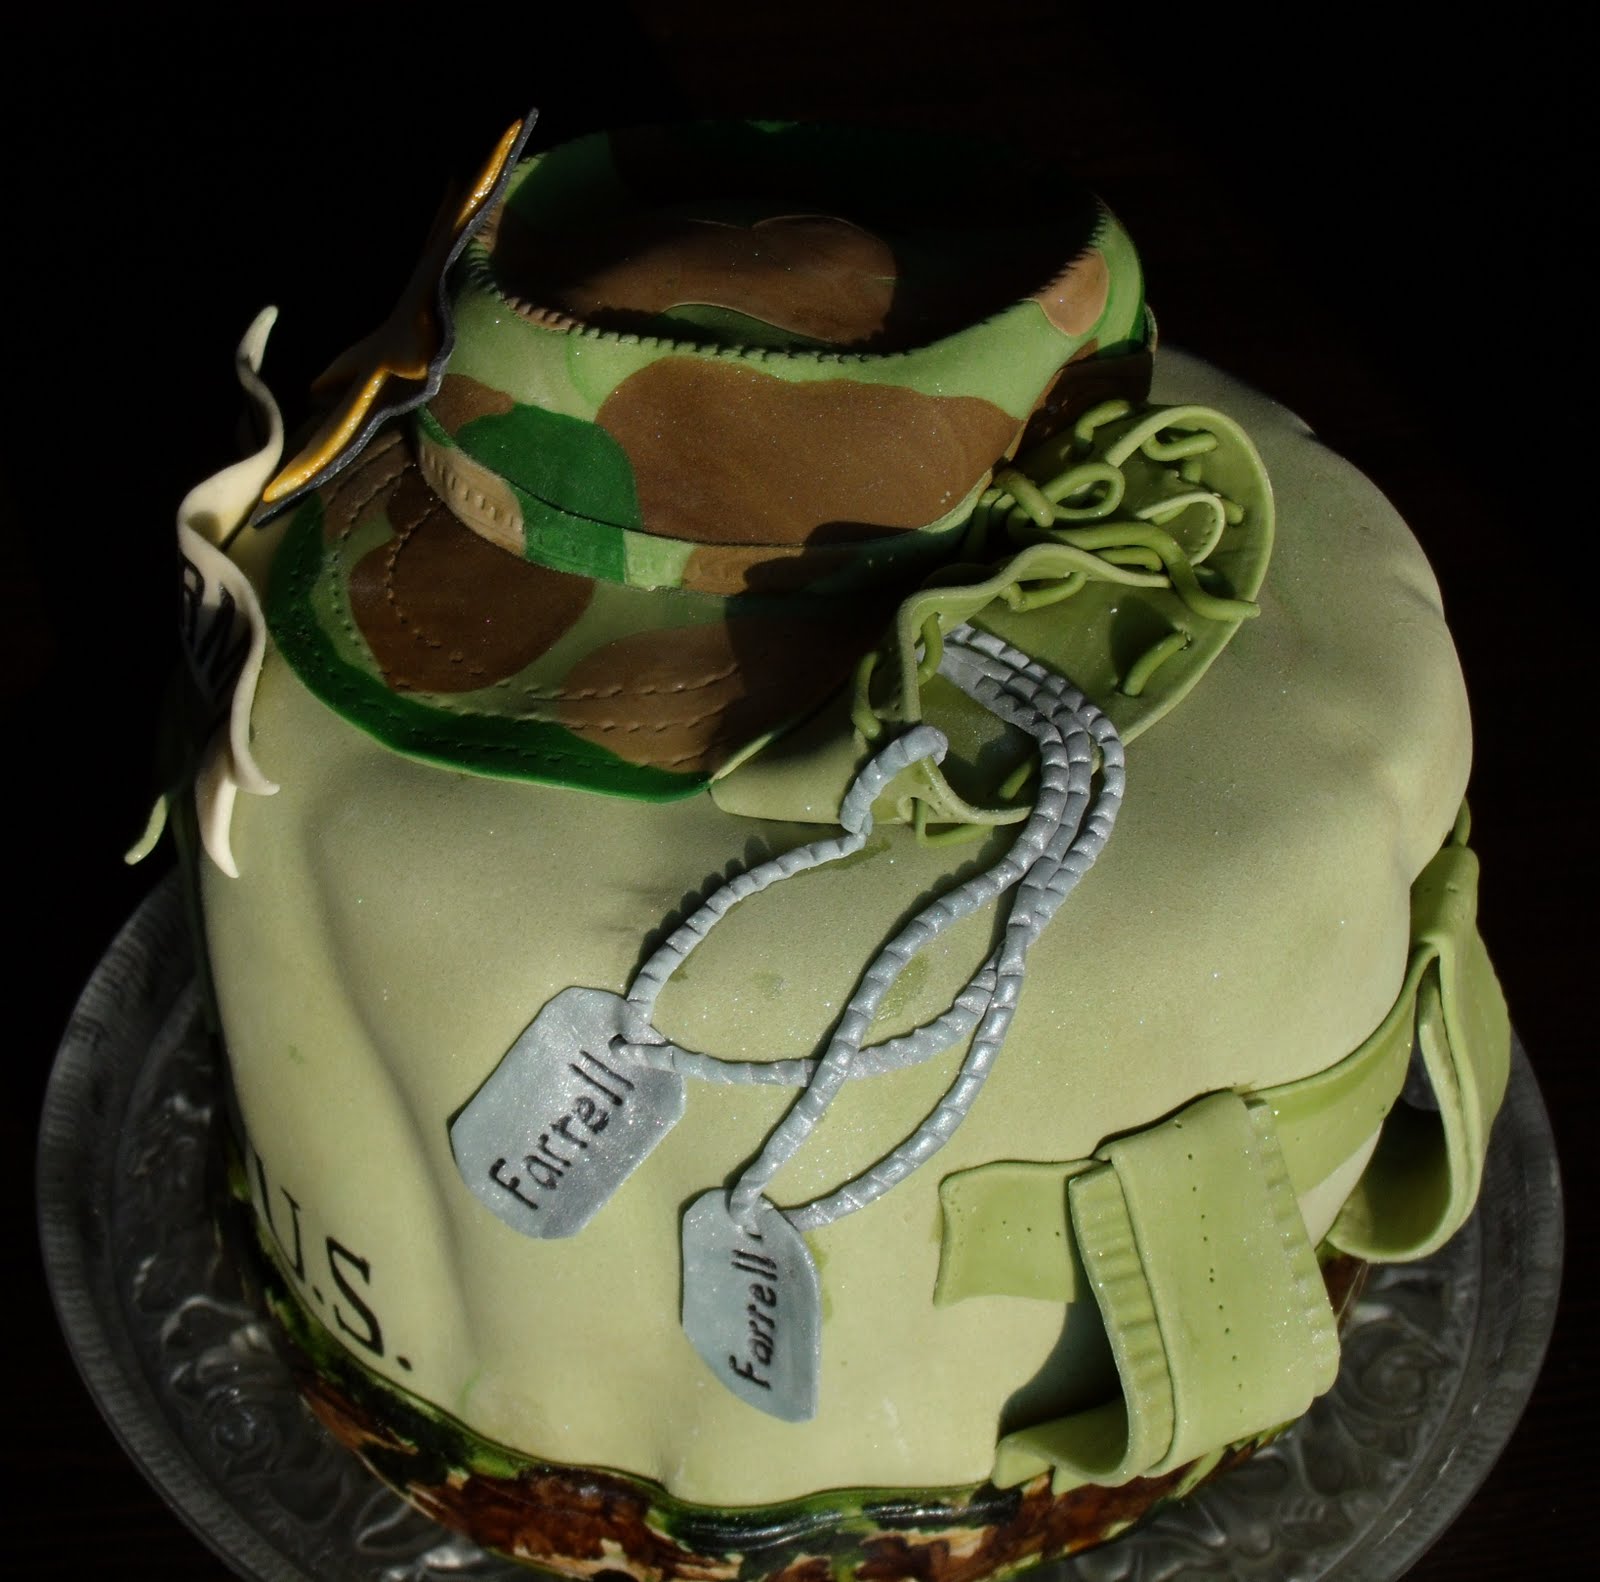 Cap is choc cake w it was an honor to design this cake for a young man ente...